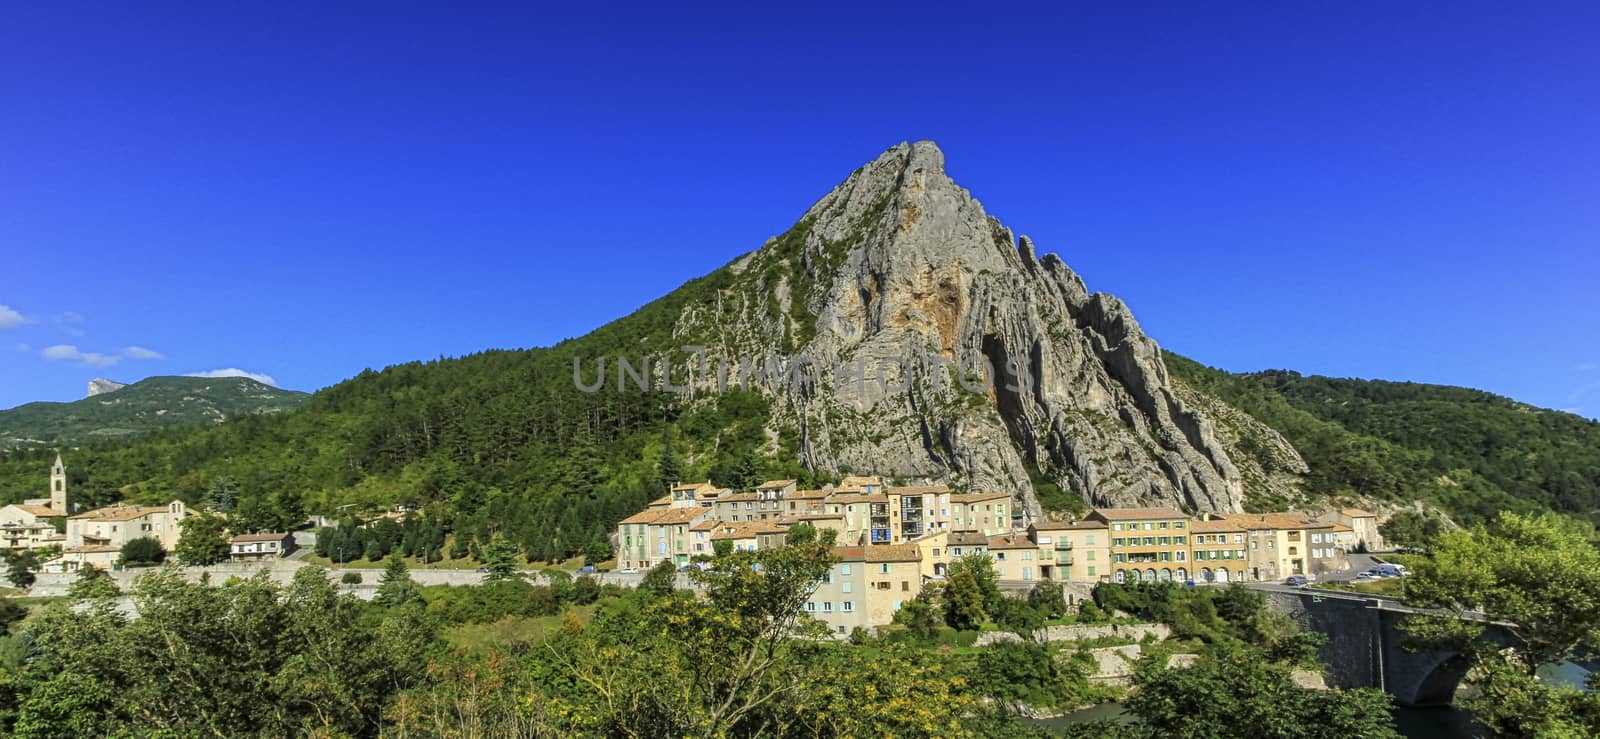 Sisteron city and Beaume big rock, France by Elenaphotos21